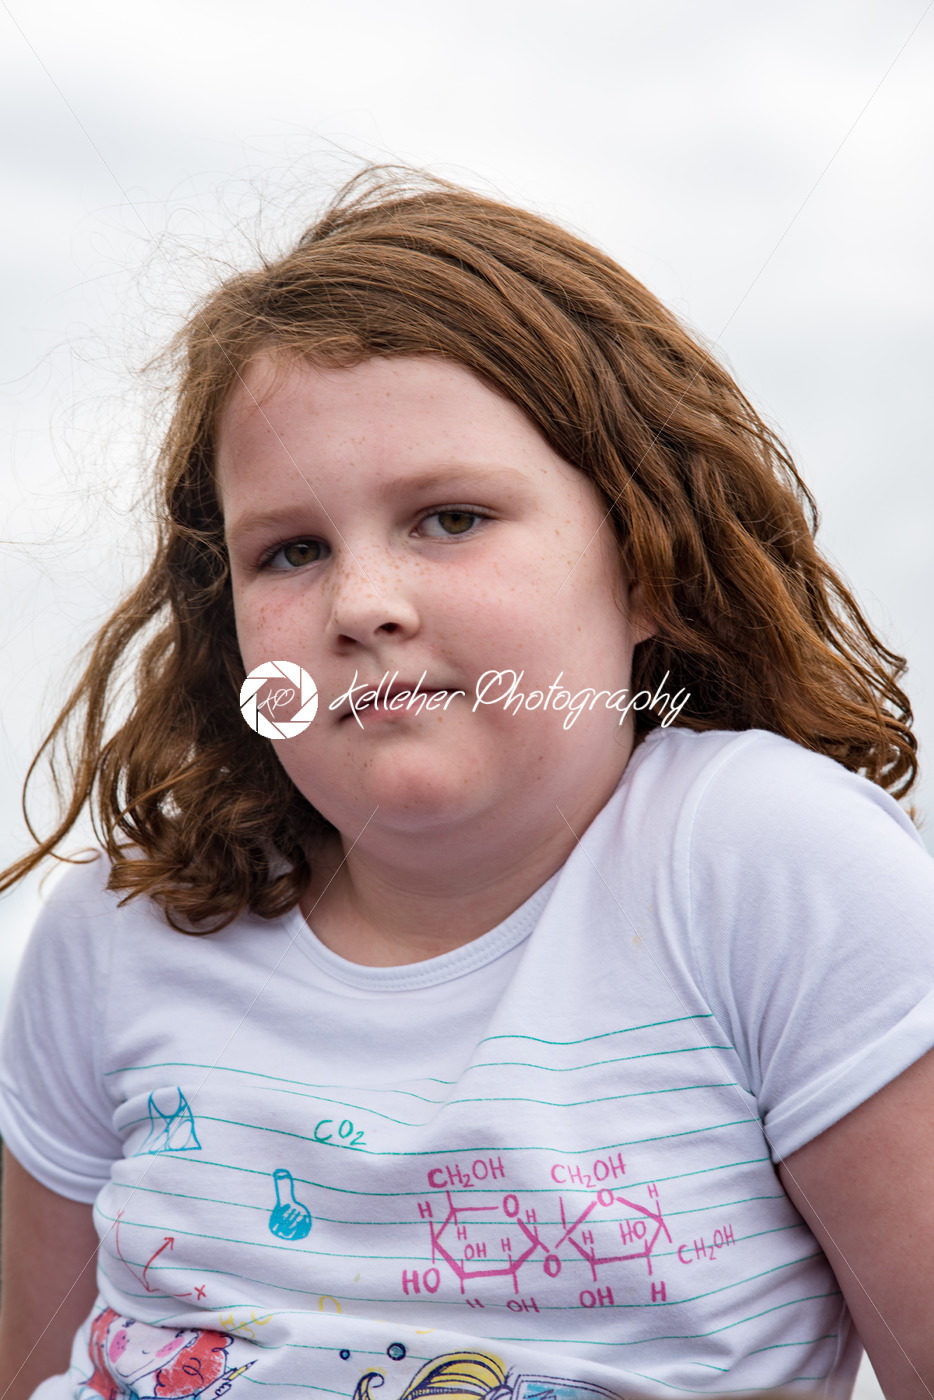 Young little girl portrait looking and smiling at the camera. - Kelleher Photography Store